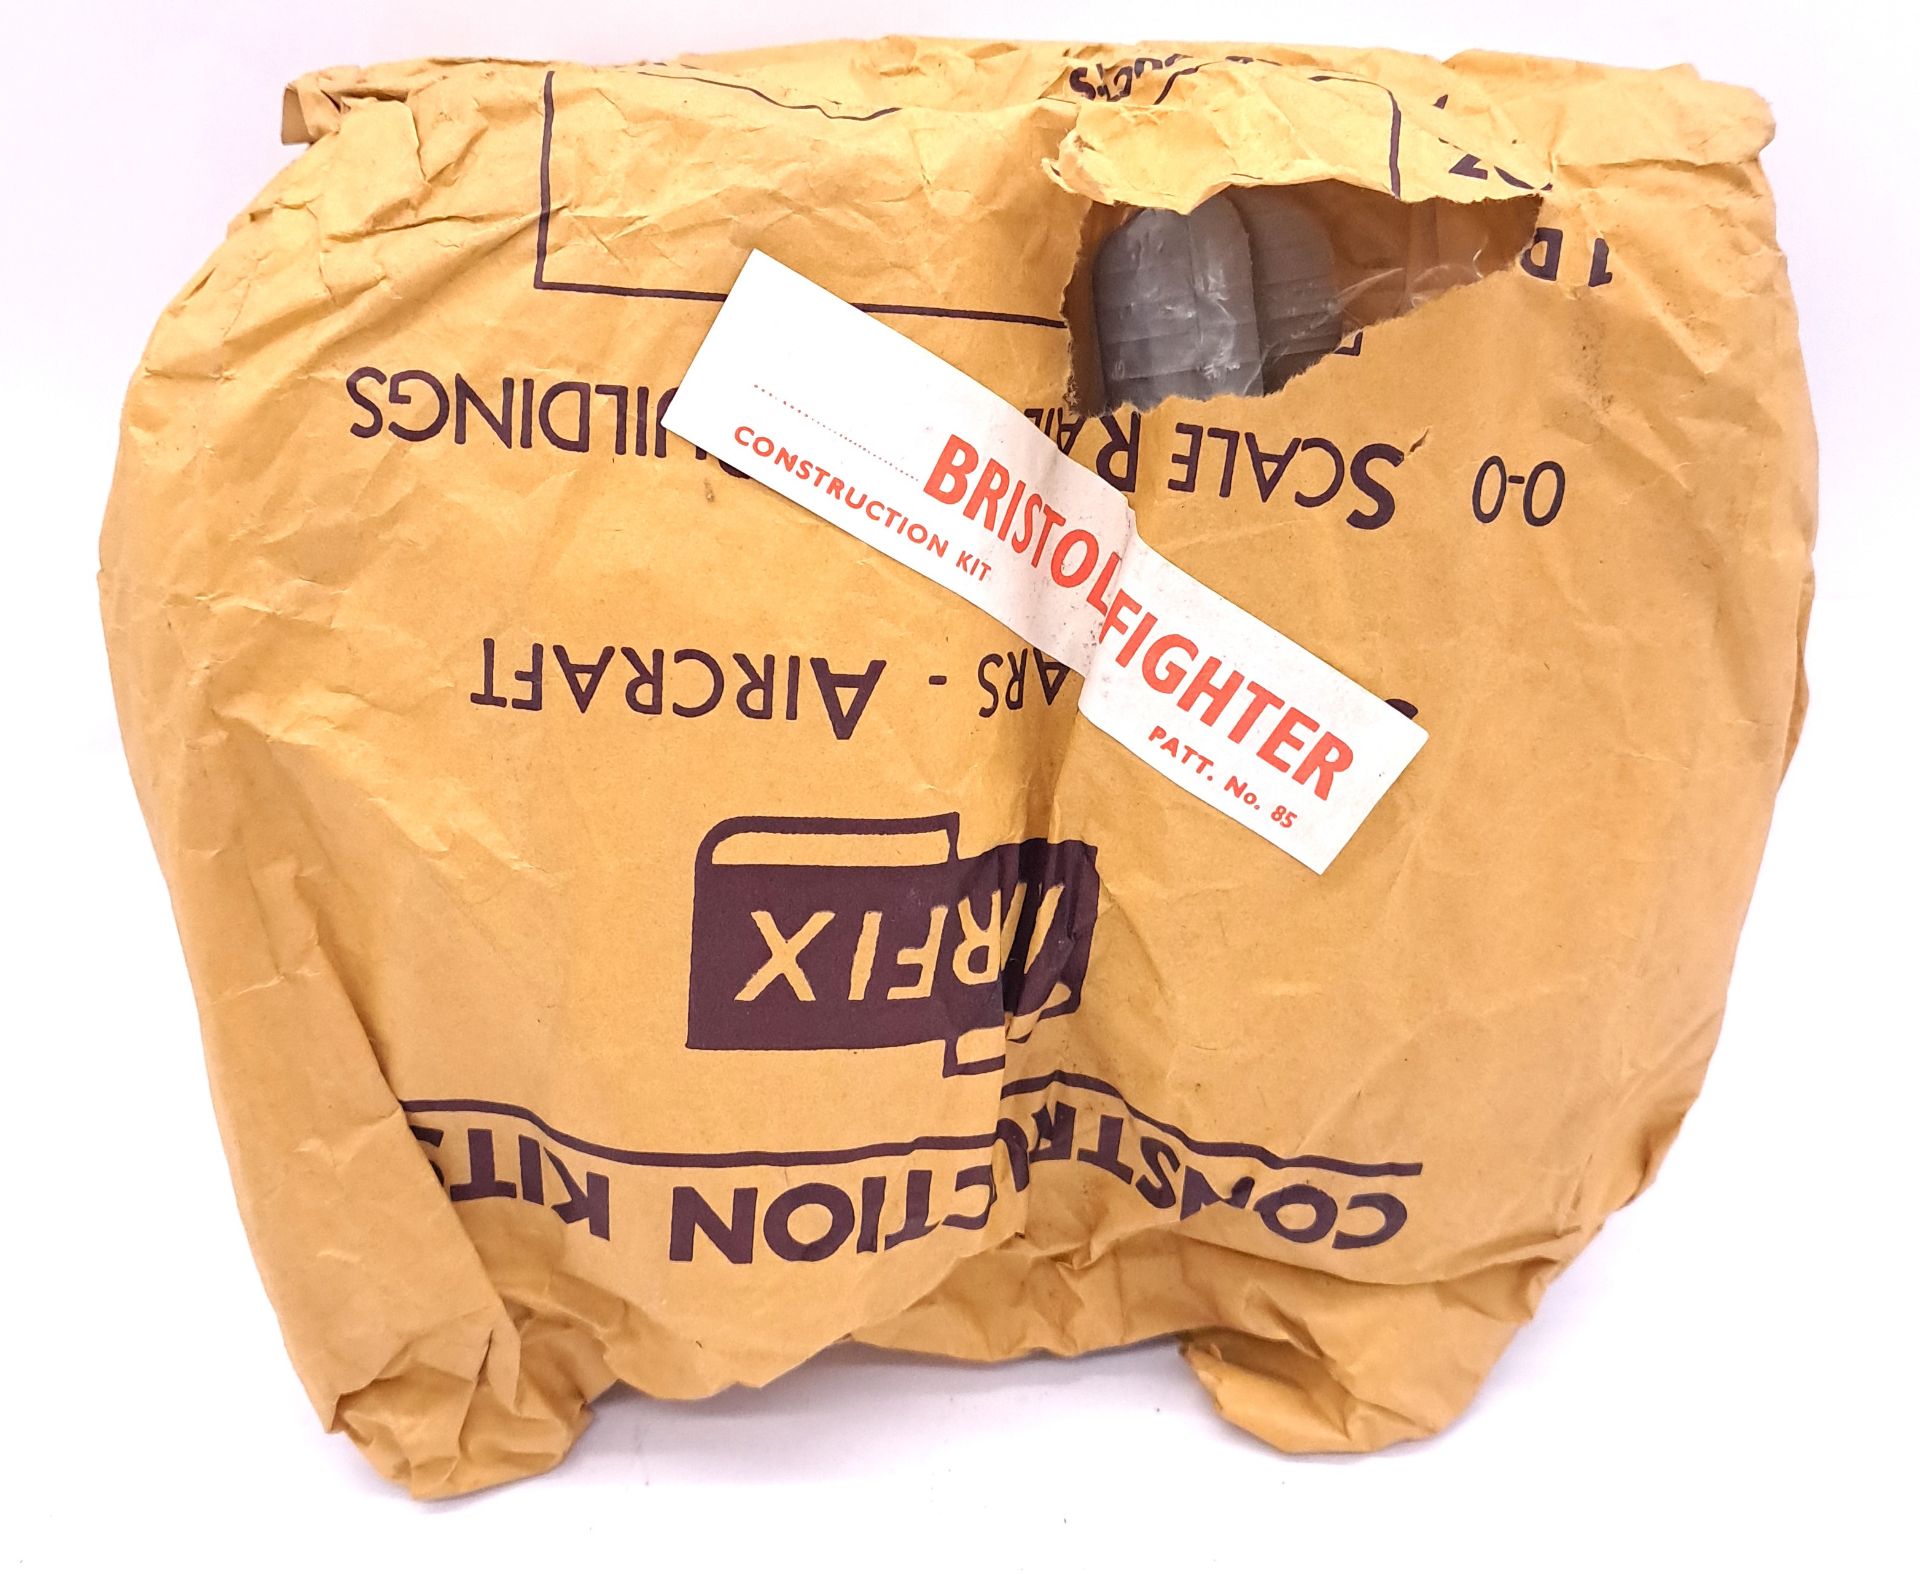 Airfix c1960’s ORIGINAL TRADE BAG complete with Bagged (possibly Type3) “Bristol Fighter” Kits - Image 2 of 8